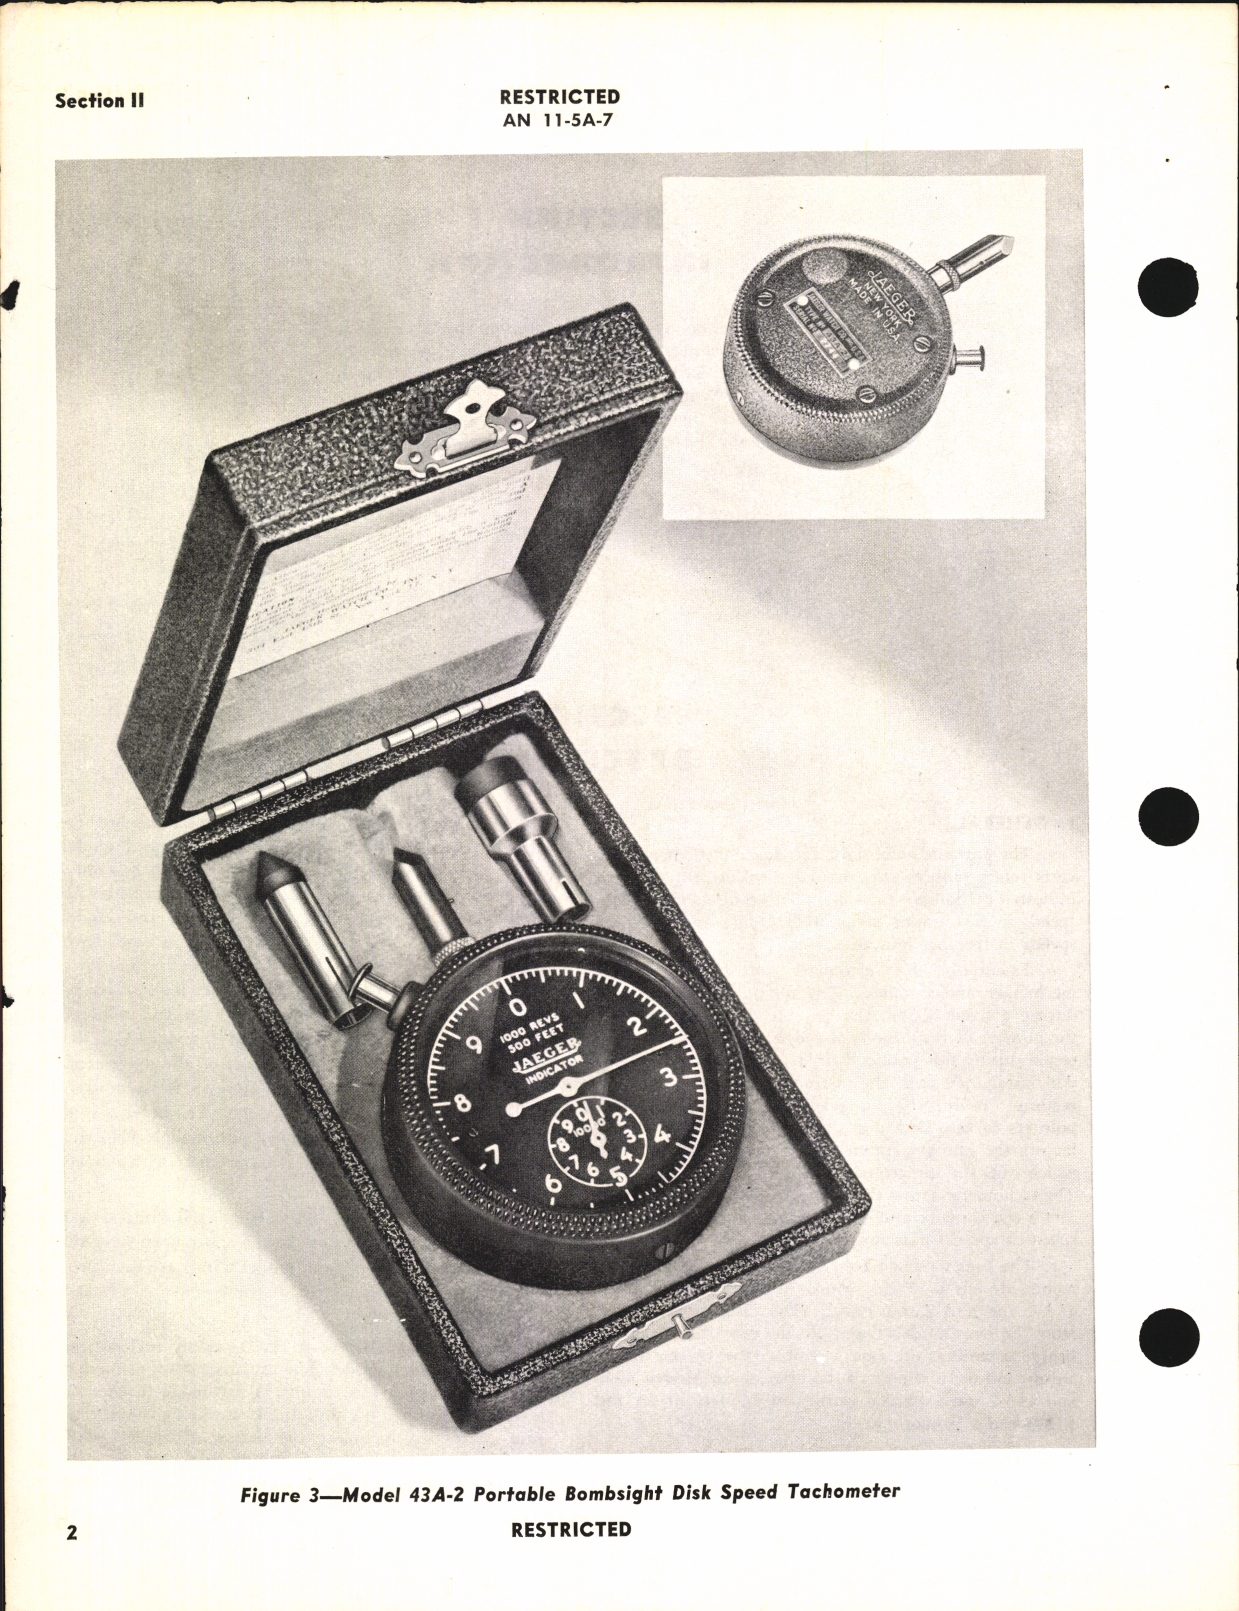 Sample page 6 from AirCorps Library document: Operation, Service, & Overhaul Instructions with Parts Catalog for Portable Bombsight Disk Speed Tachometer